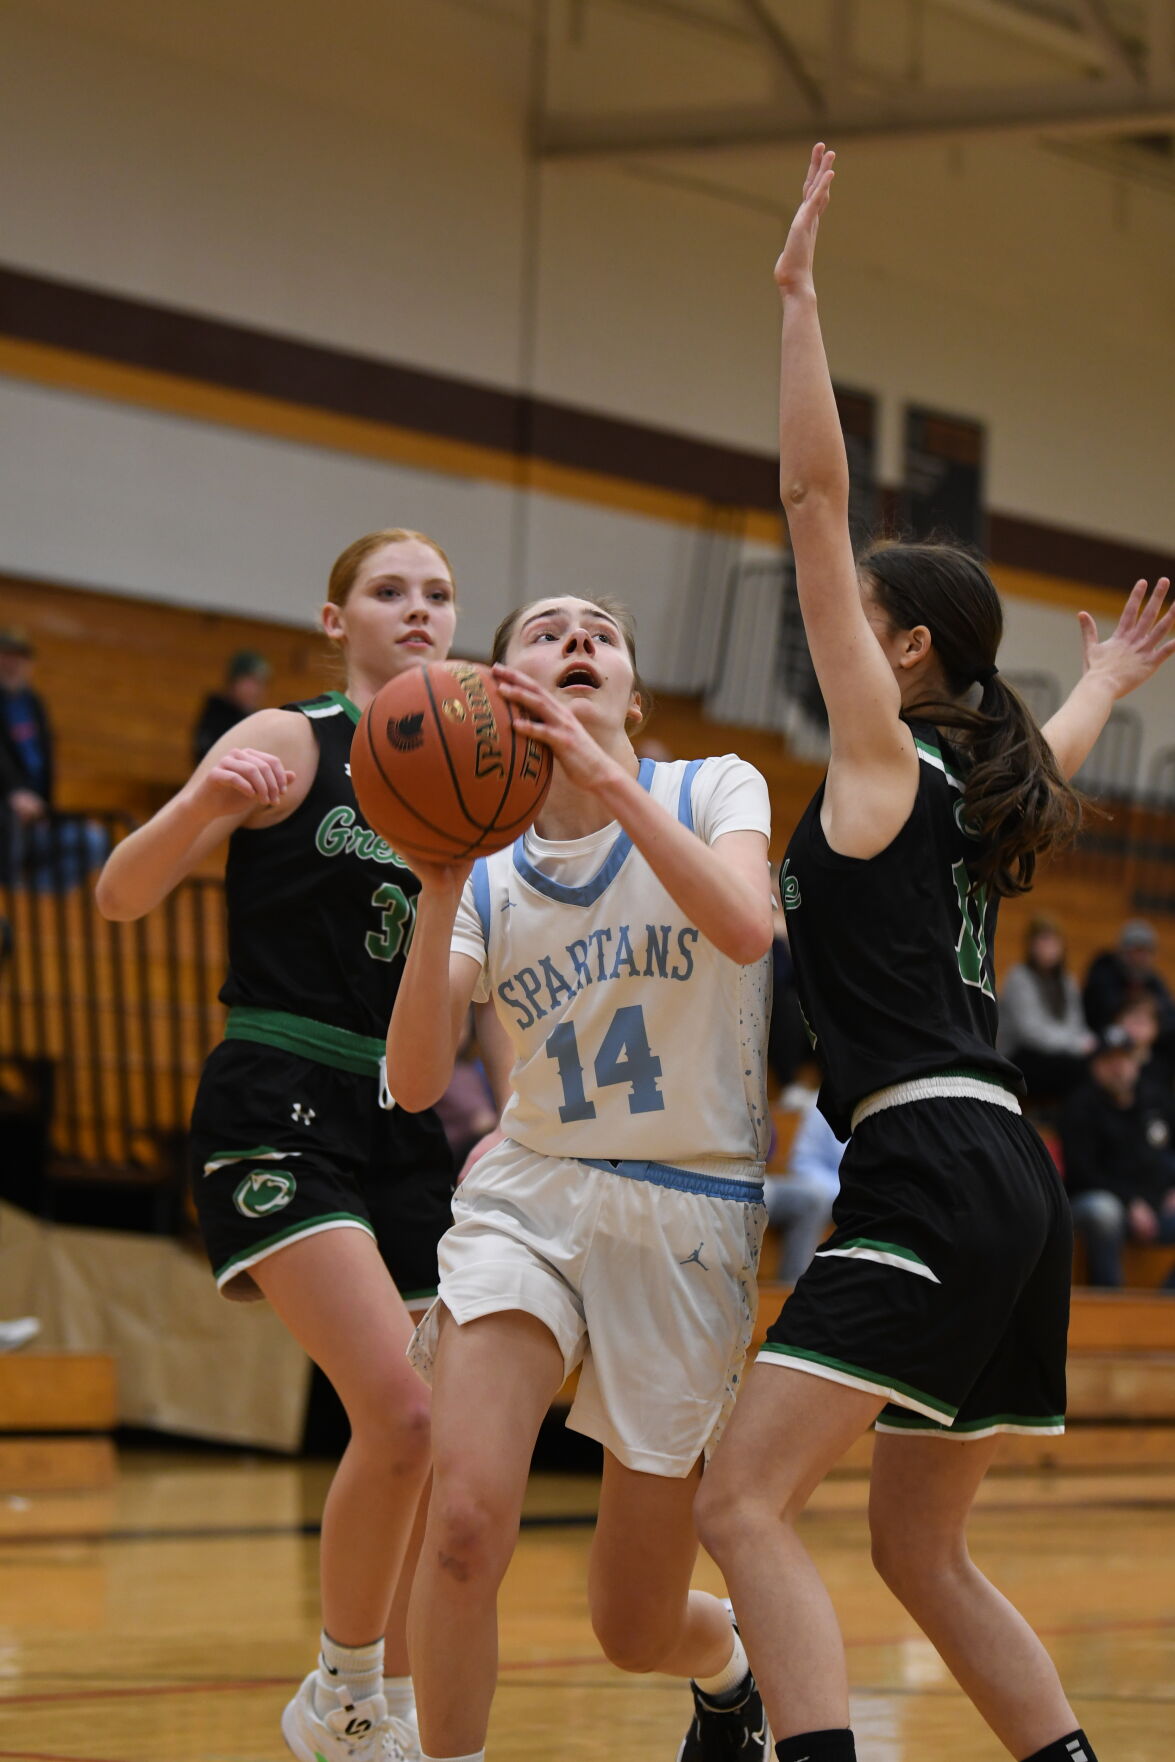 Greendale dominates West Bend West in a girls basketball showdown, Ethan Bast leads wrestling to third place at MatBoss Christmas Tournament